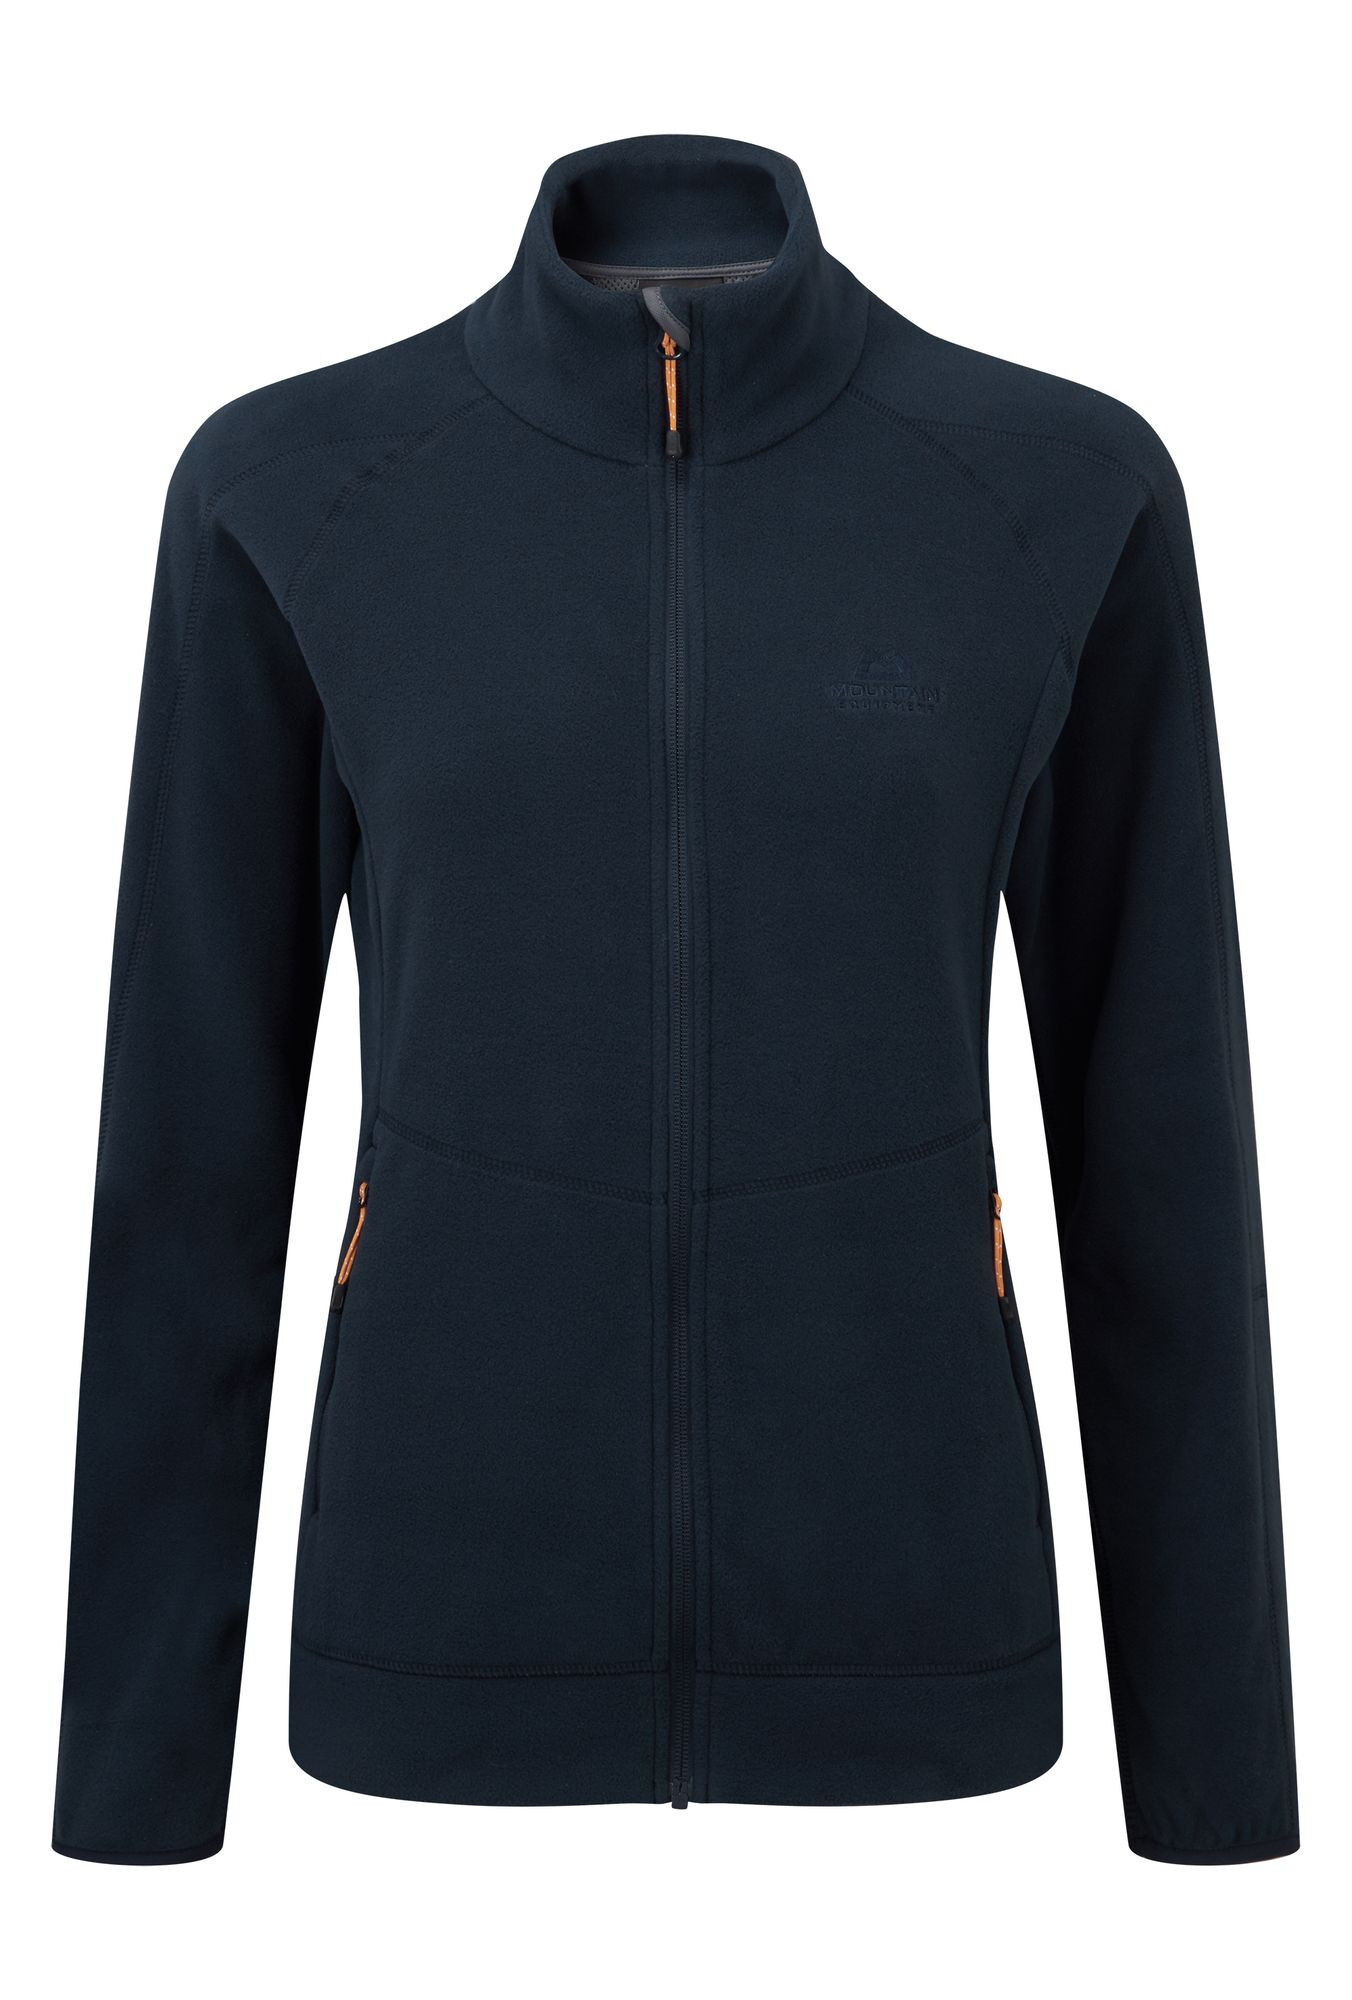 Mountain Equipment Centum Jacket - Giacca in pile - Donna | Hardloop